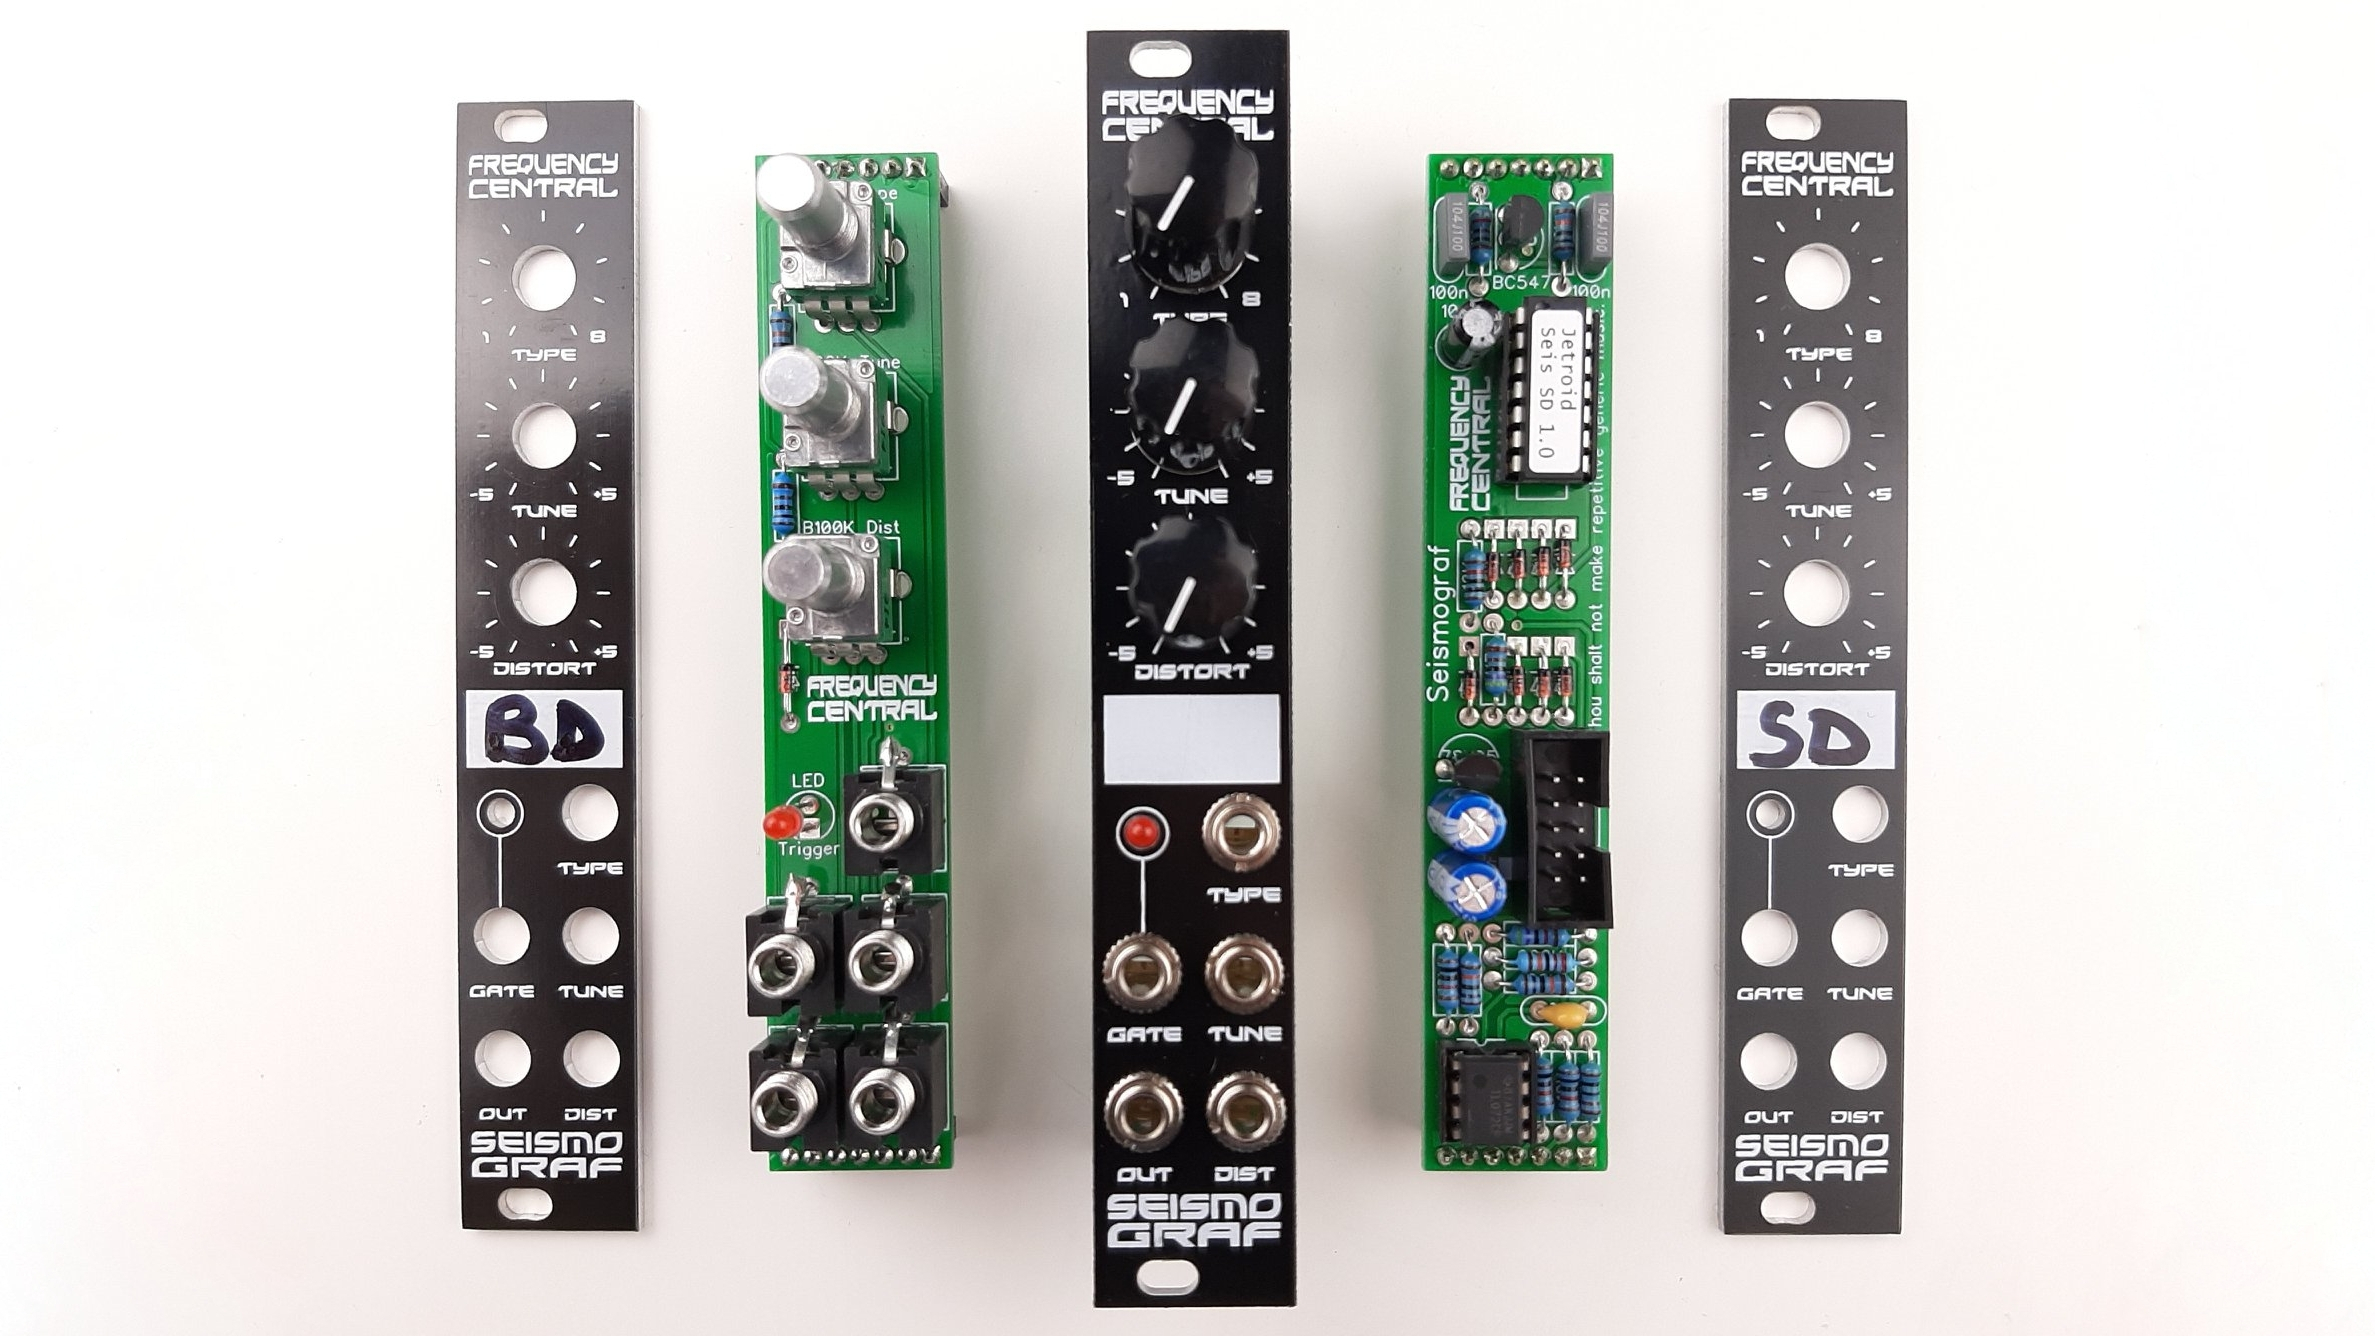 Frequency Central Seismograf module broken down into it's constituent parts; two panels, two circuit boards, and an assembled module are visible.